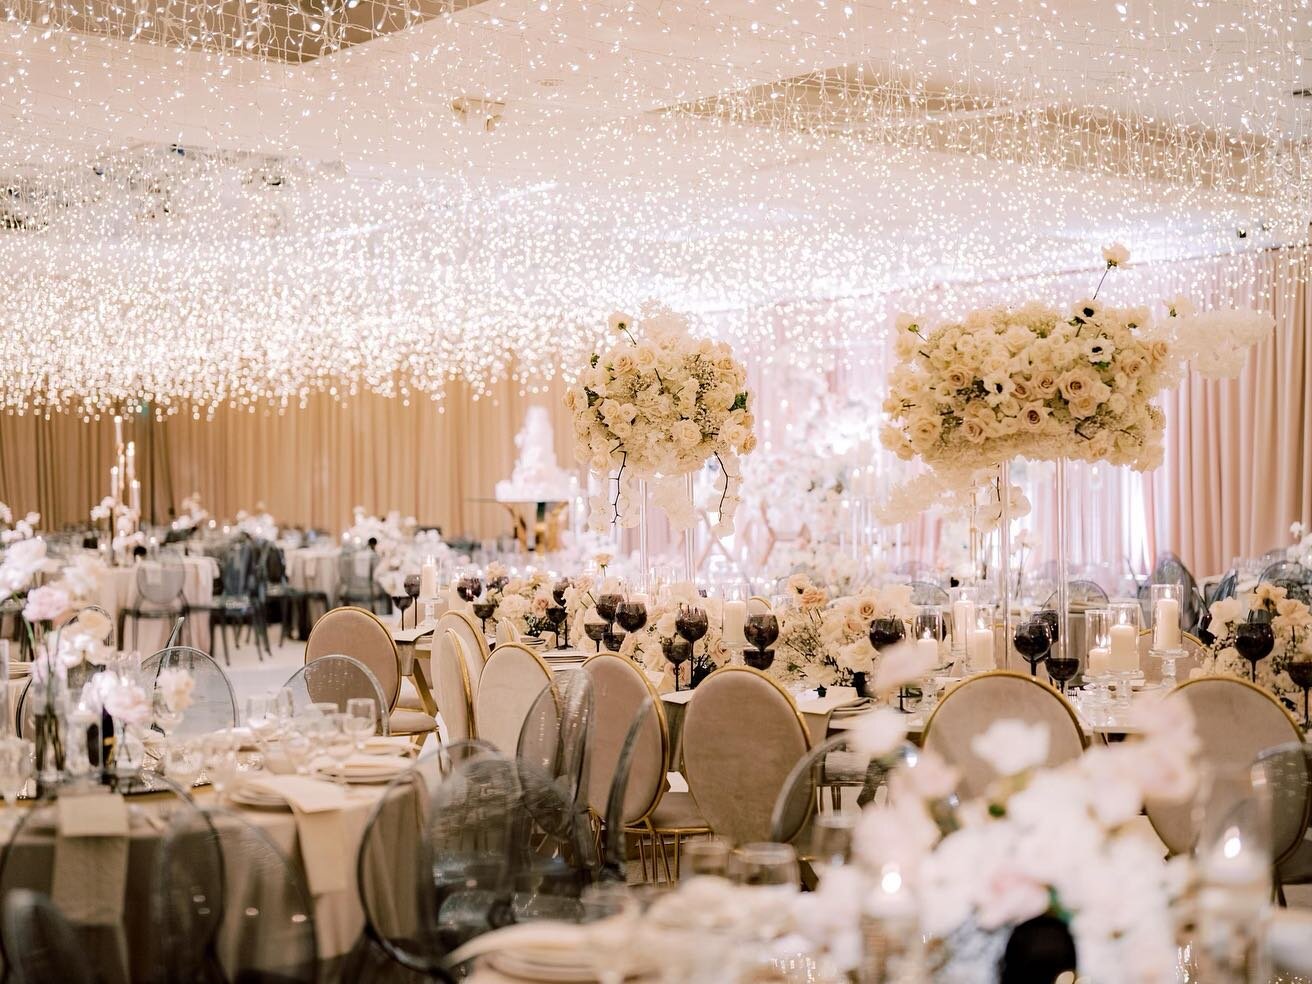 Lighting sets the mood for everything ✨ We loved being part of this special event. Watching the couples reaction always makes everything worth it! Thank you to the newlyweds for trusting us with their special day 🤍

Planning |@valvuitton Bridal Hair